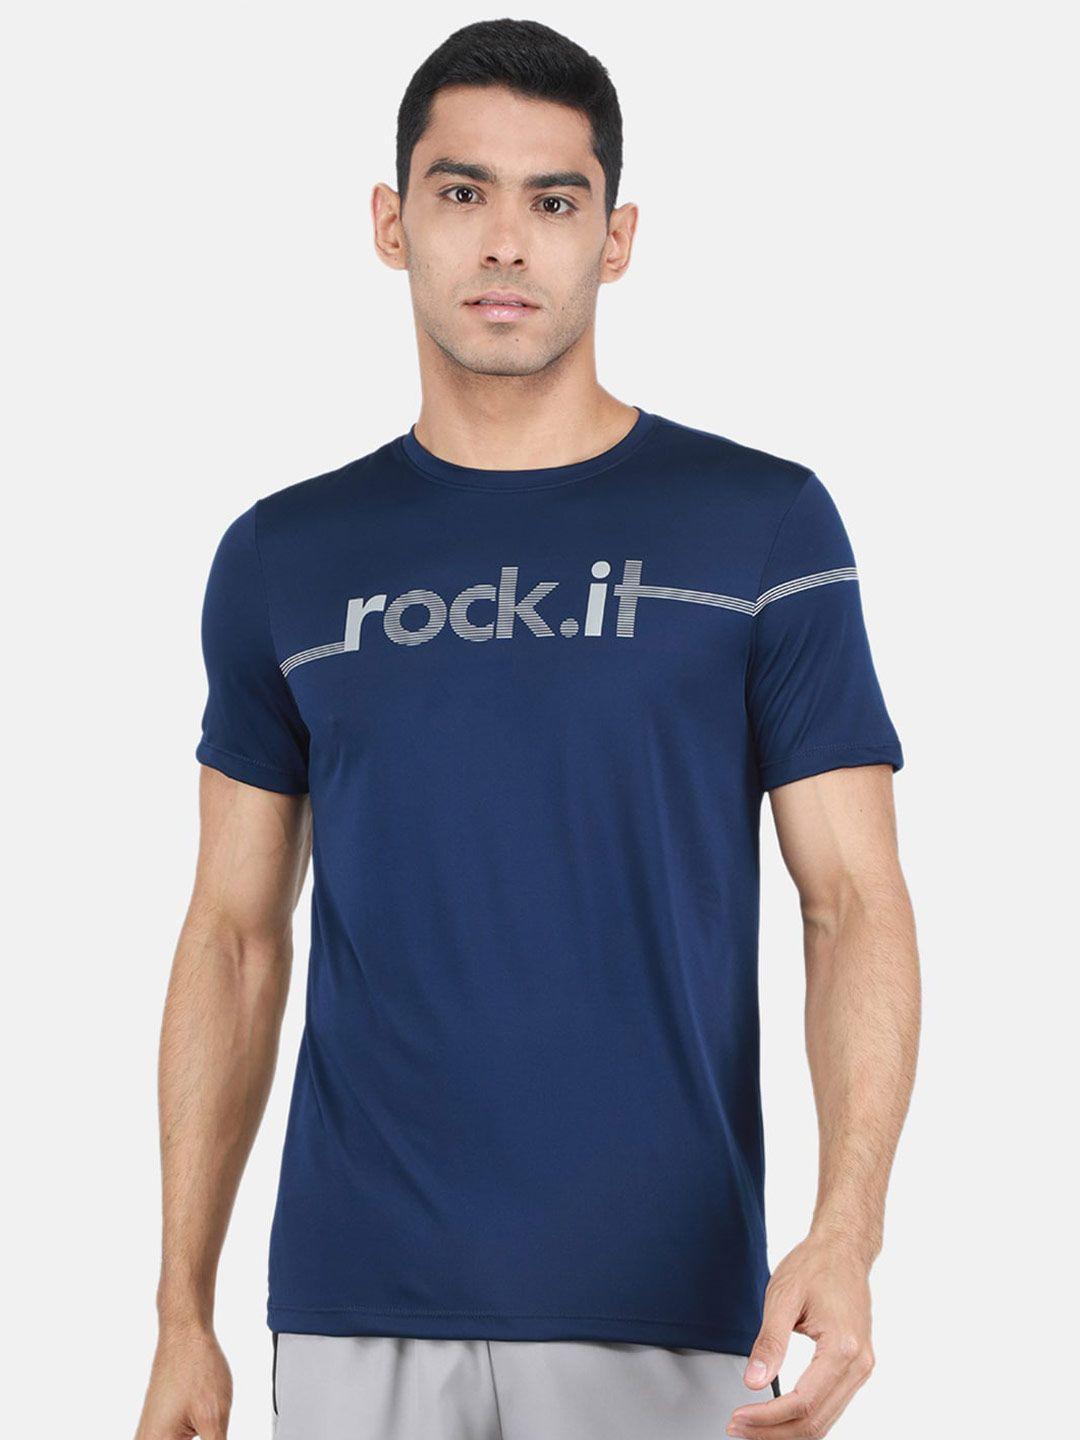 rock.it typography printed casual t-shirt